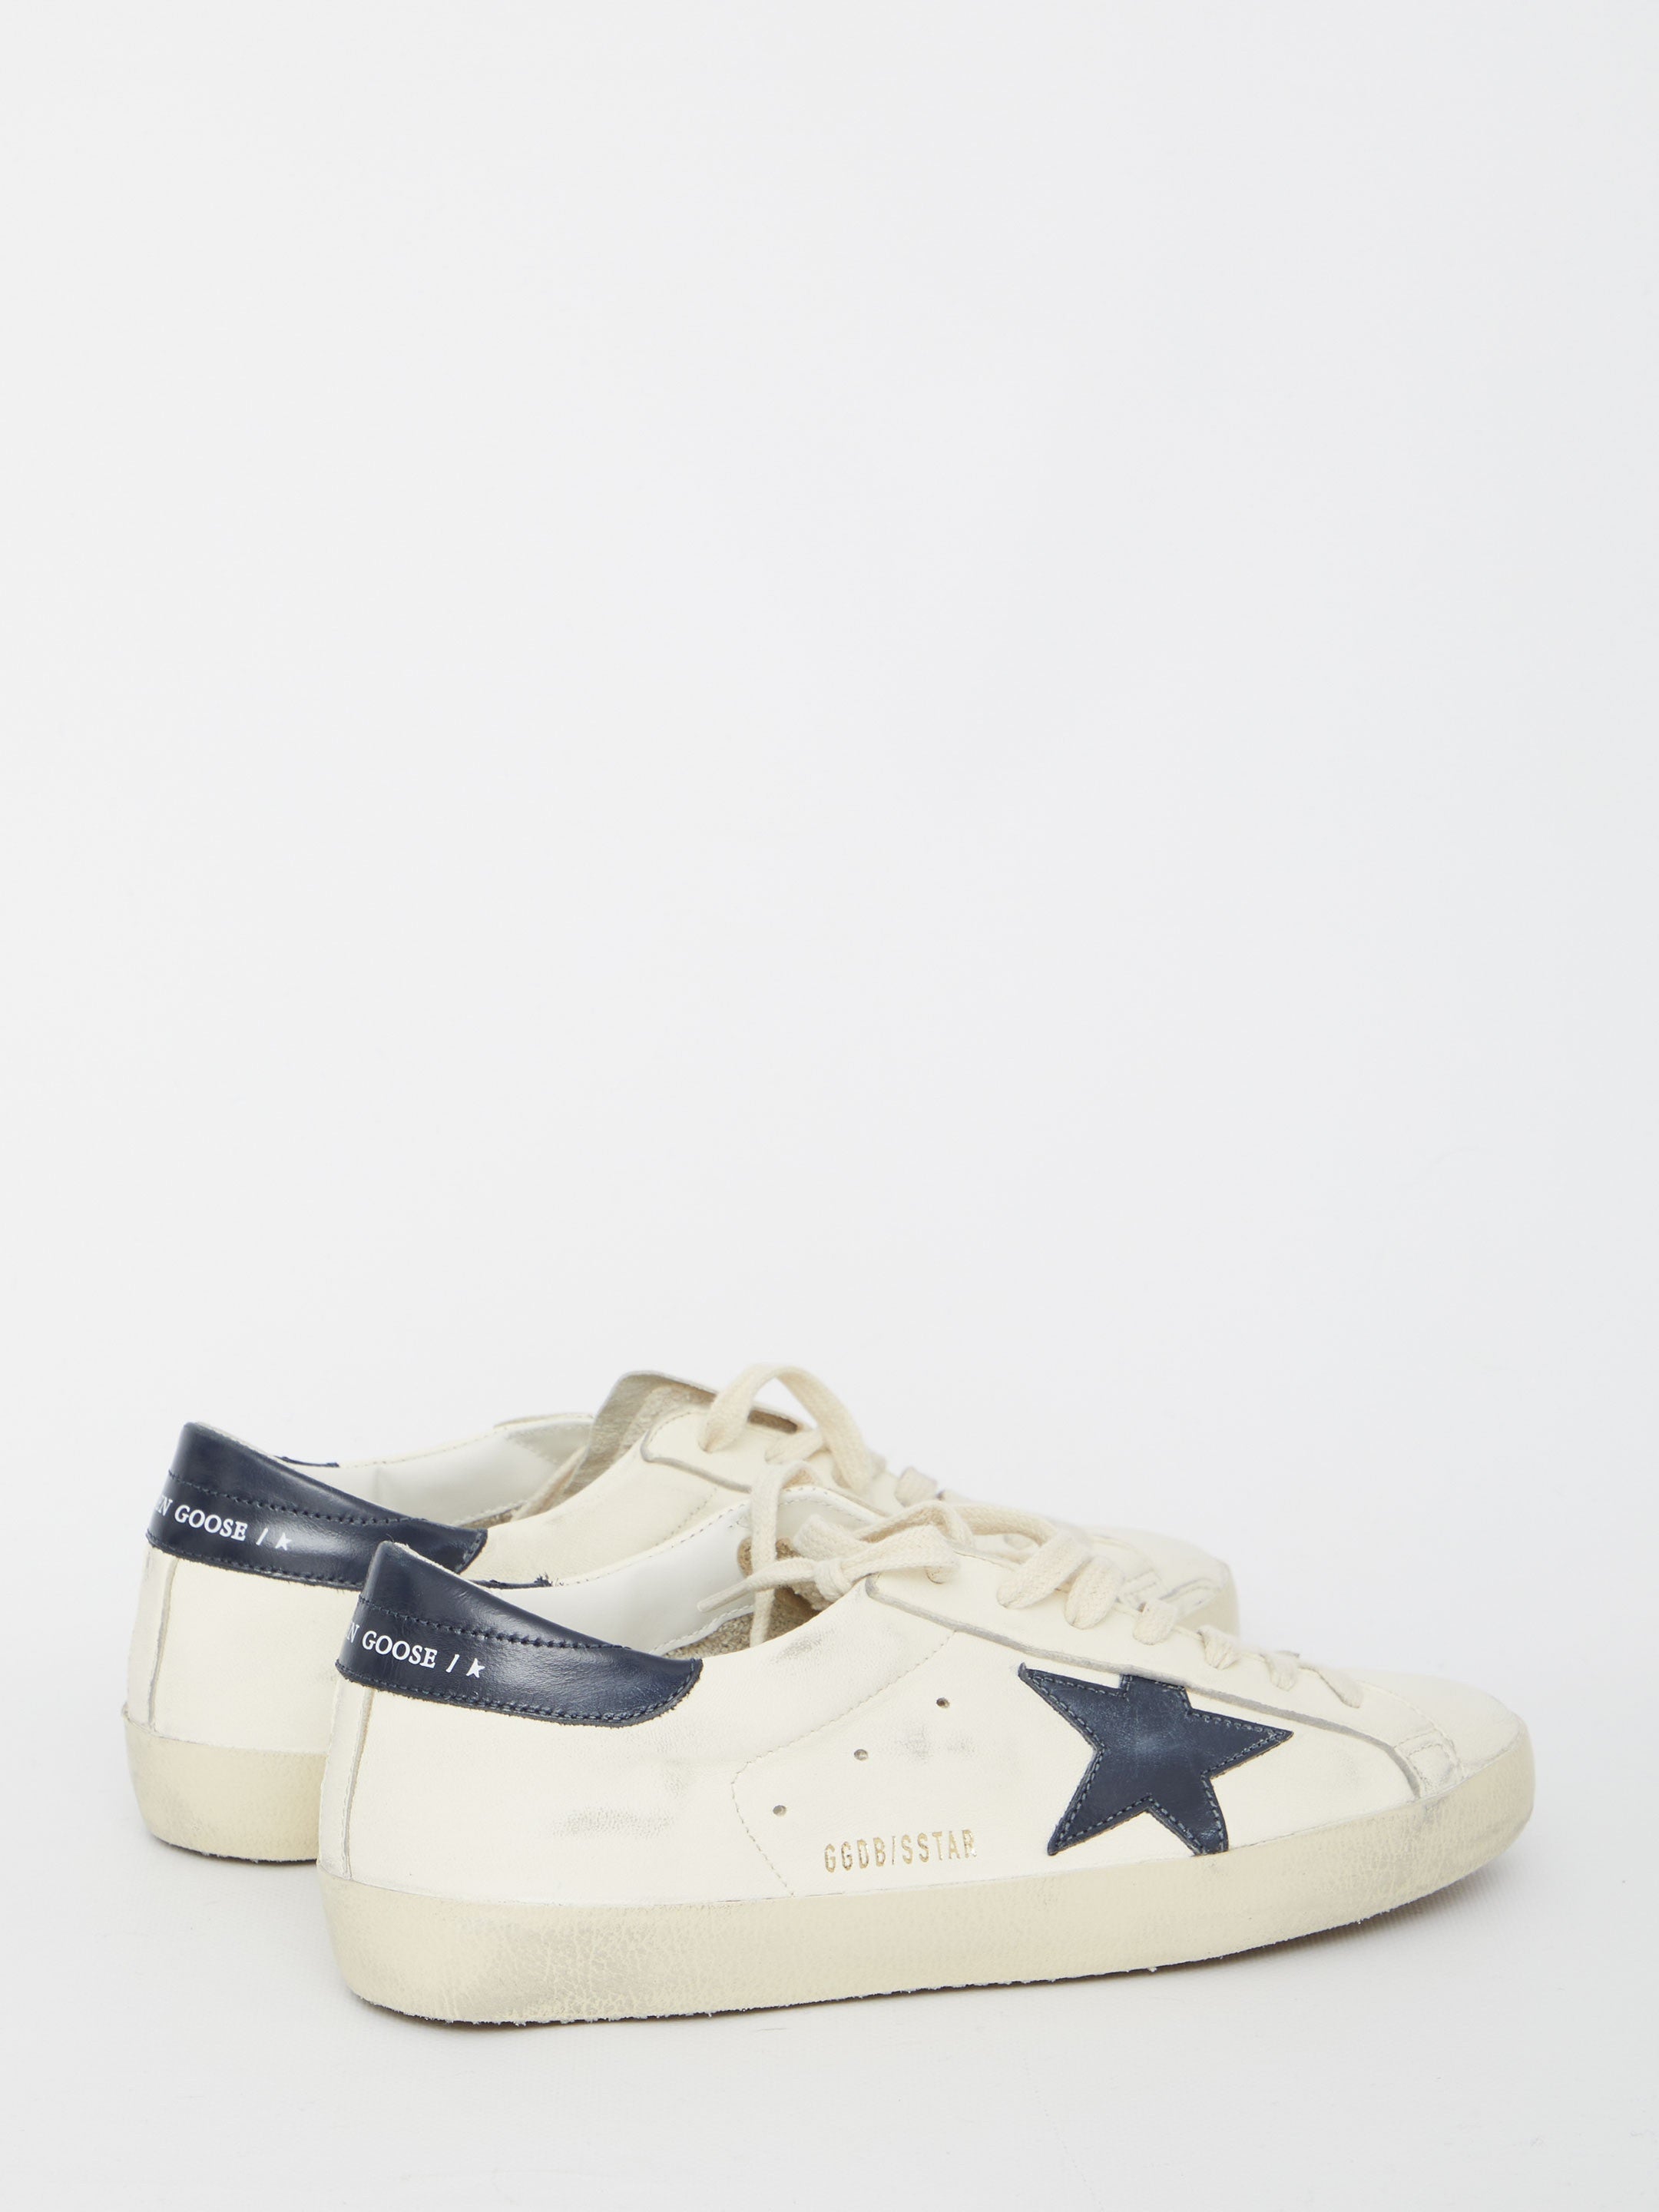 GOLDEN-GOOSE-OUTLET-SALE-Super-Star-sneakers-Sneakers-44-BEIGE-ARCHIVE-COLLECTION-3.jpg